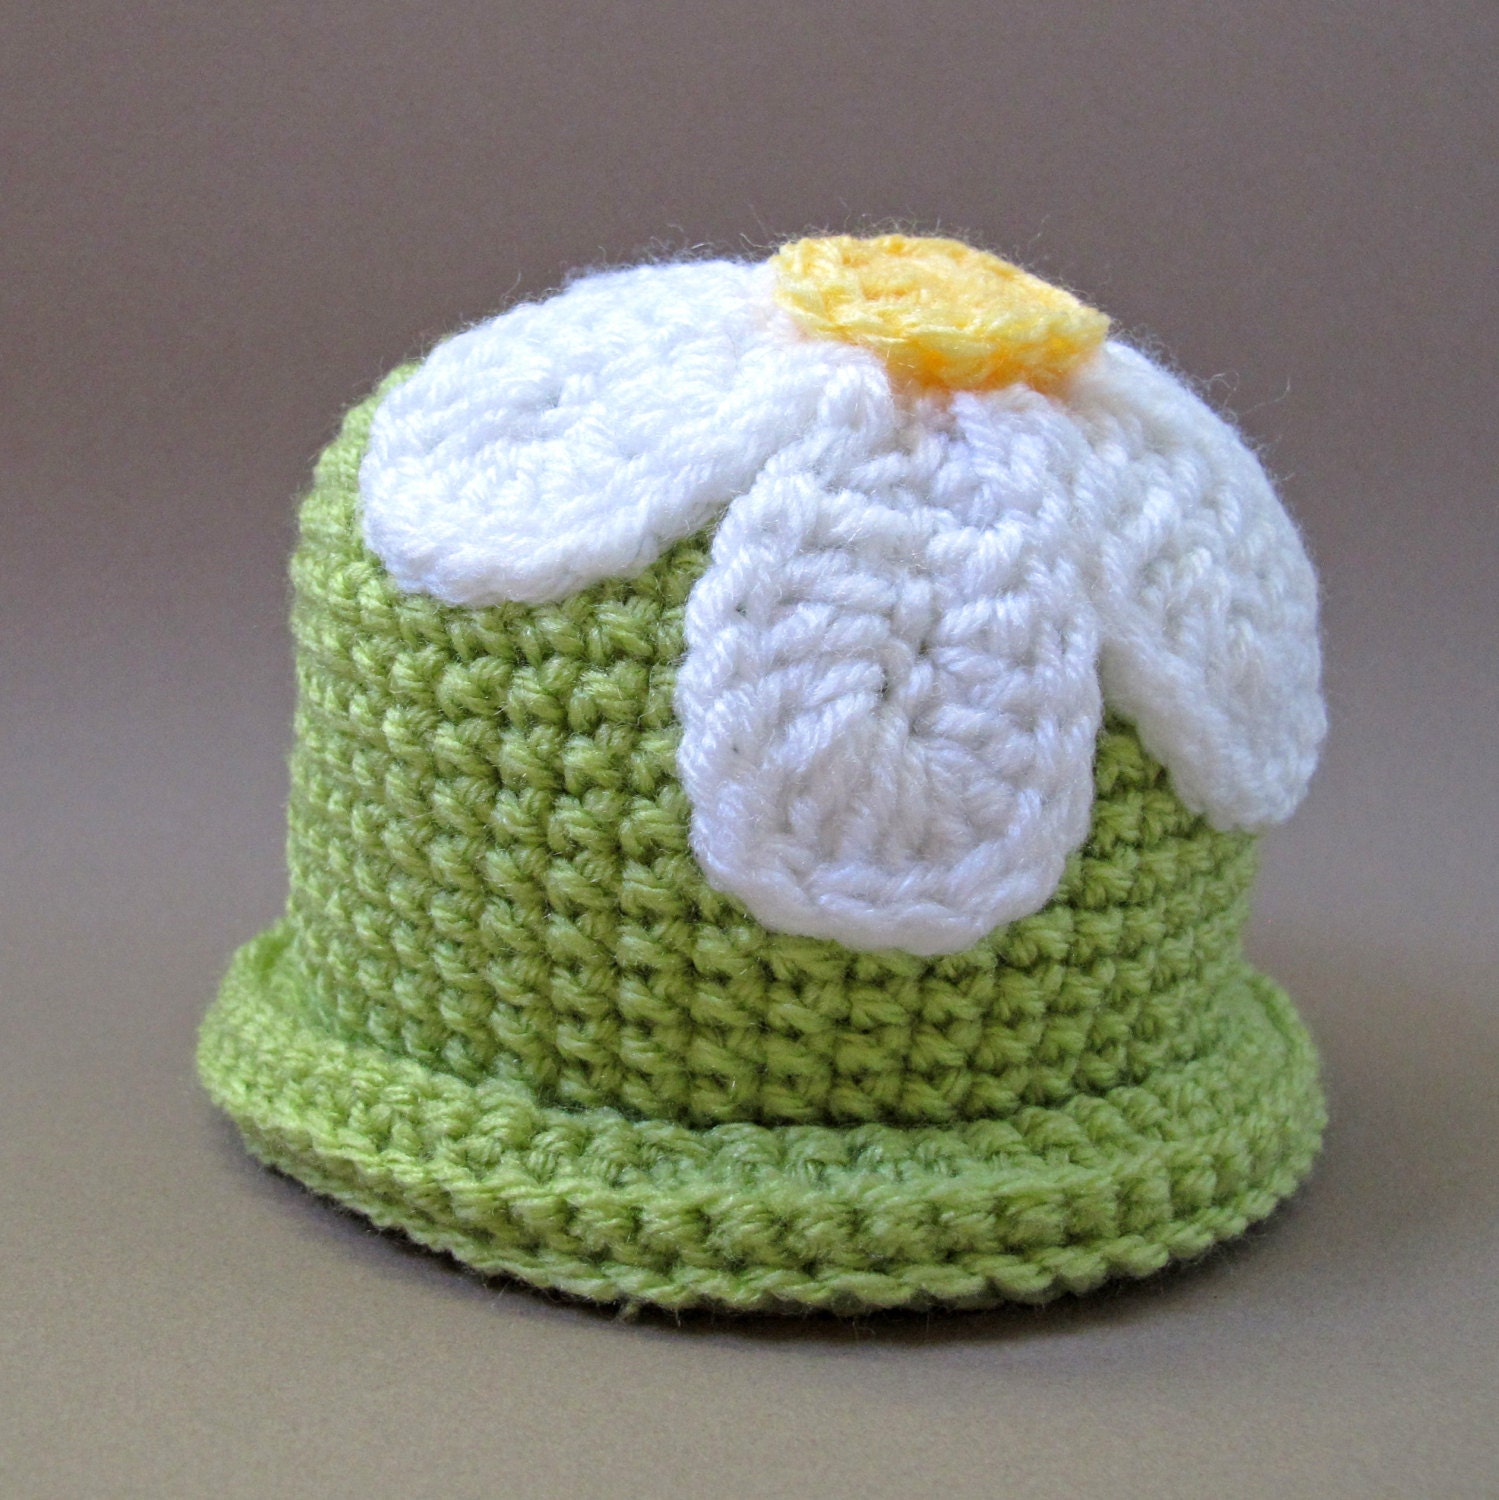 CROCHET PATTERN - Spring Fling - a beanie hat with flower in 5 sizes (Baby - Adult) - Instant PDF Download